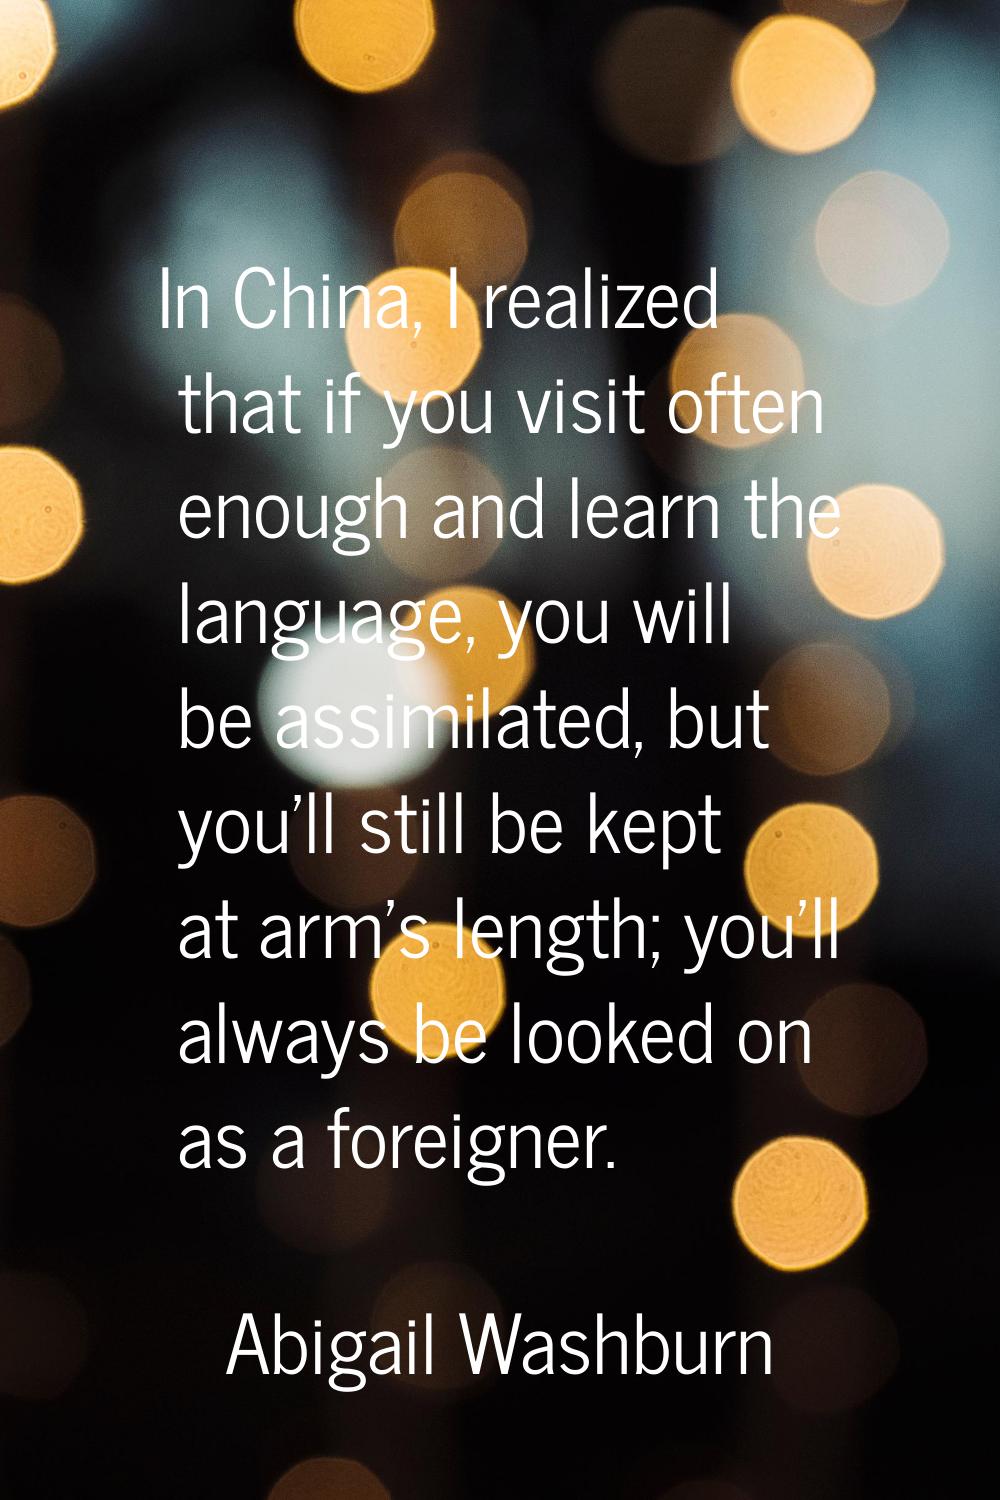 In China, I realized that if you visit often enough and learn the language, you will be assimilated